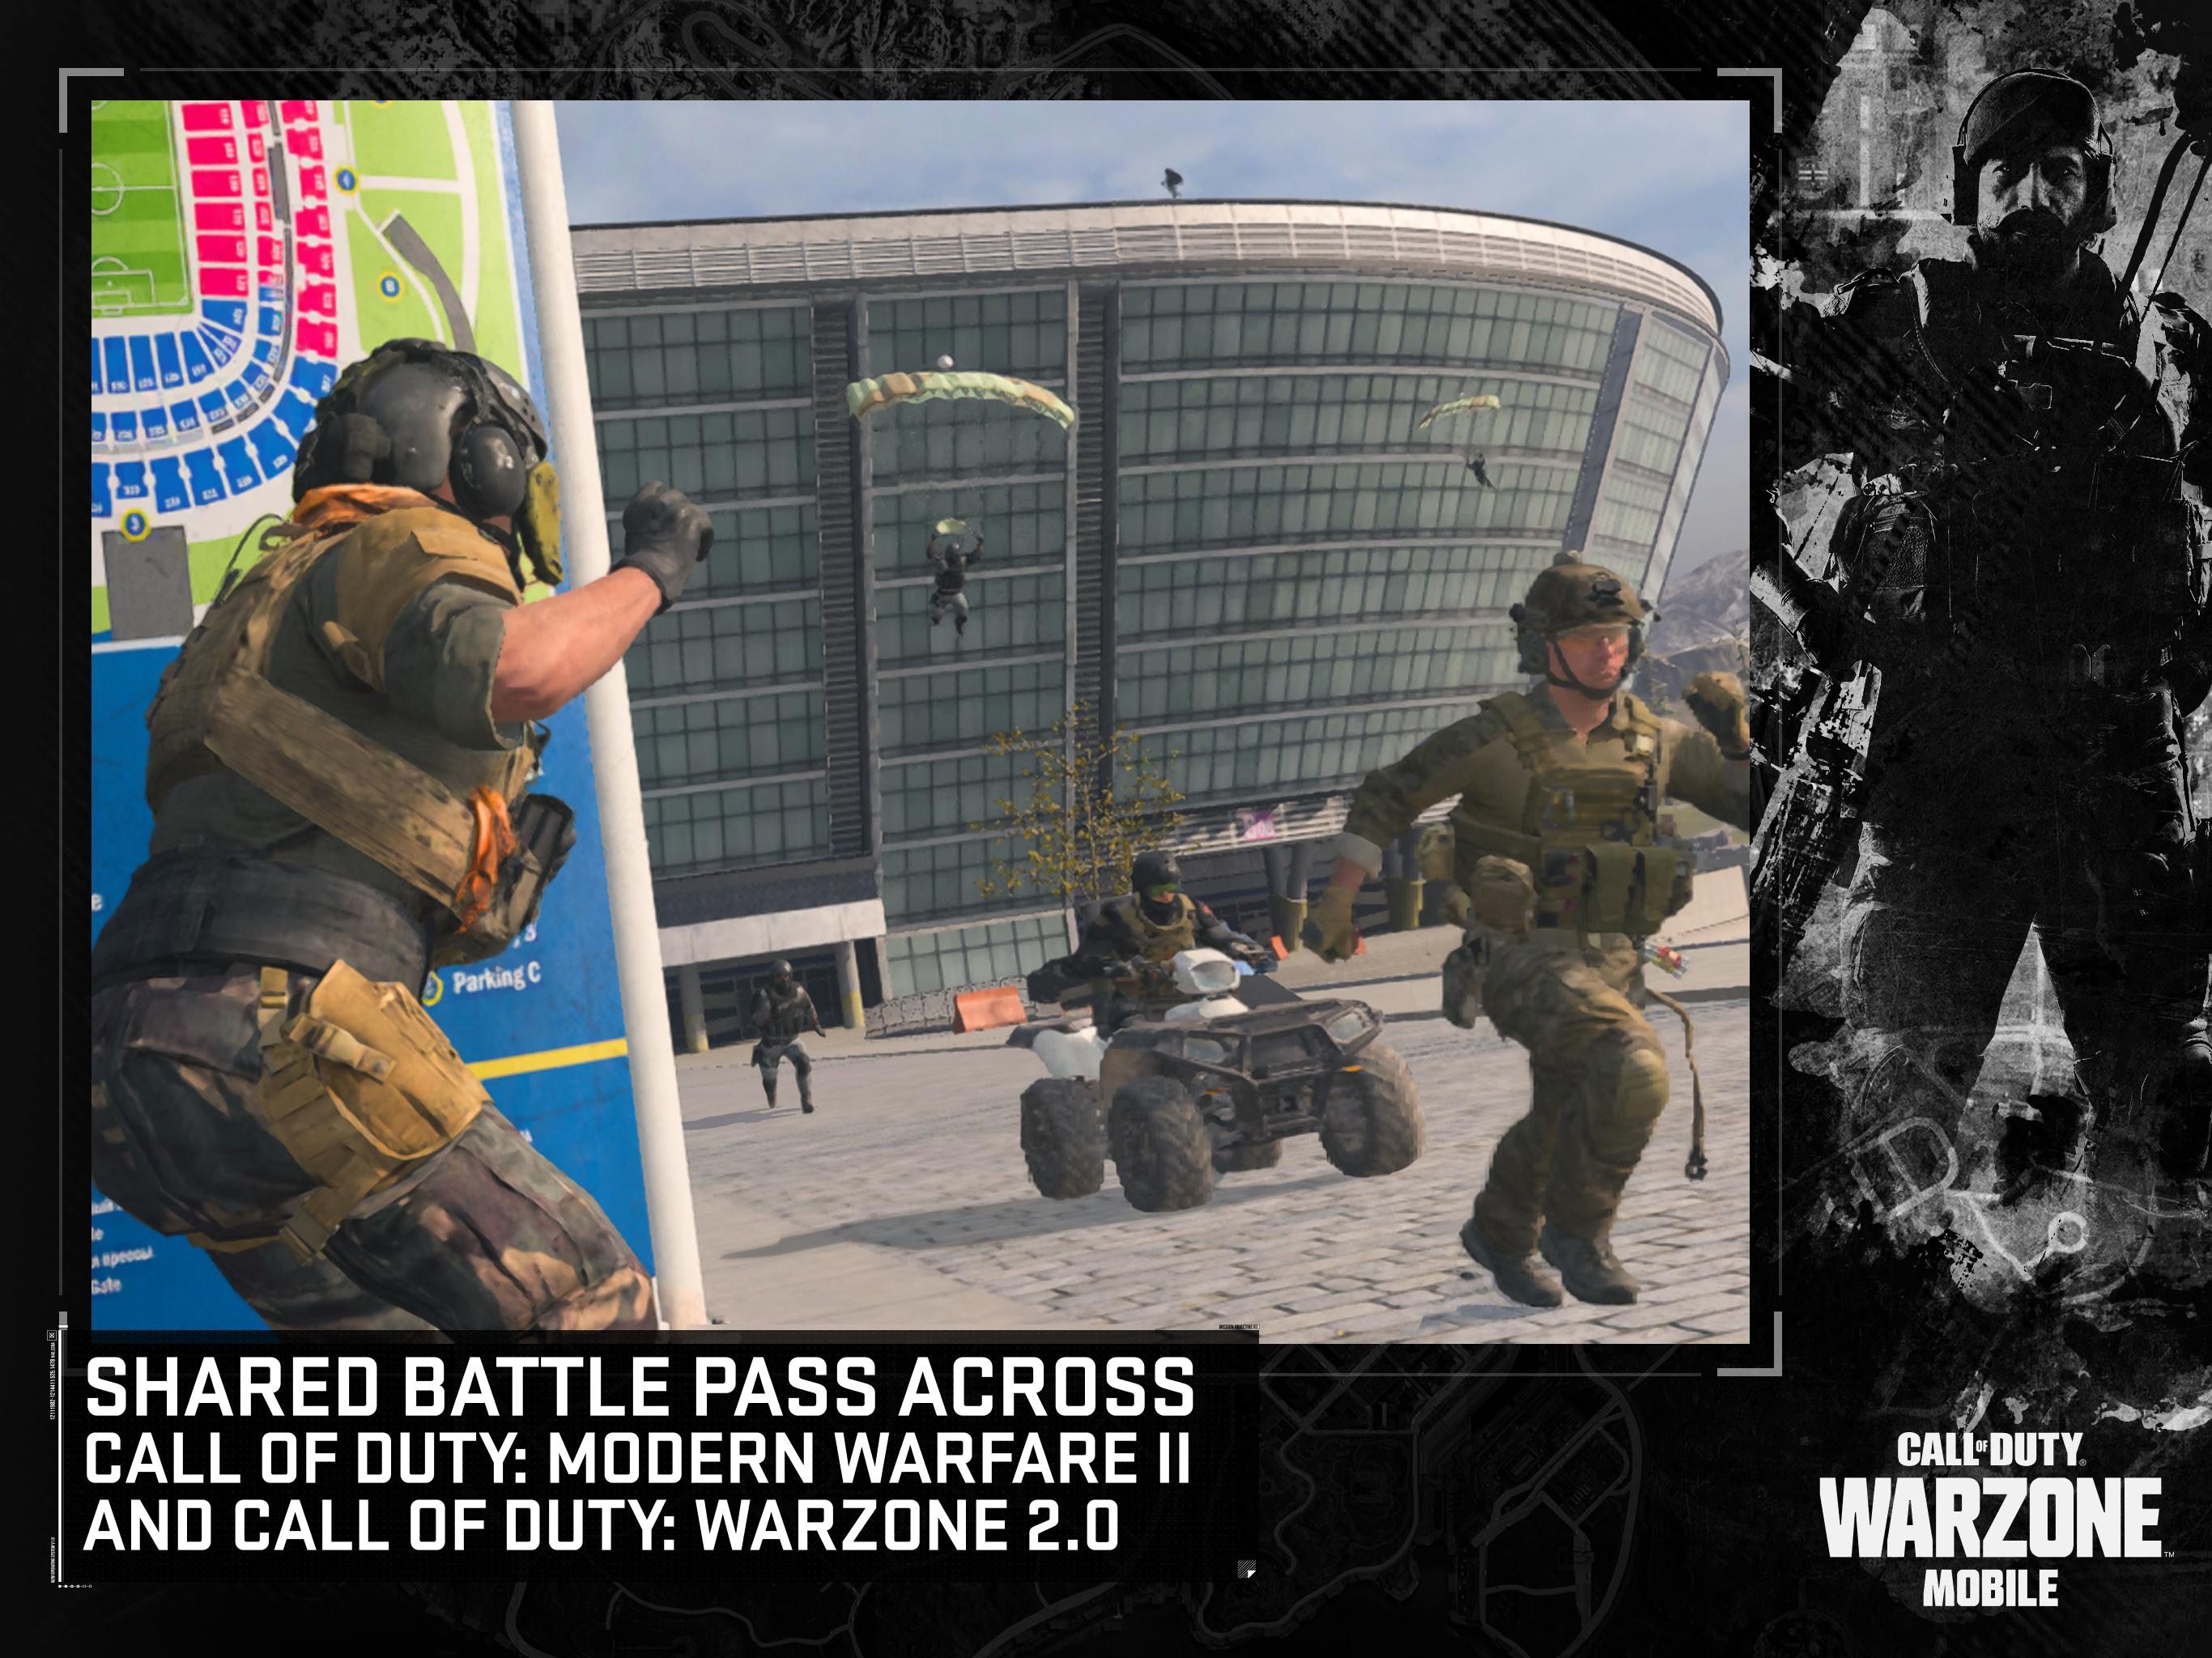 Latest and Trending Call of Duty®: Warzone™ Mobile News - TapTap